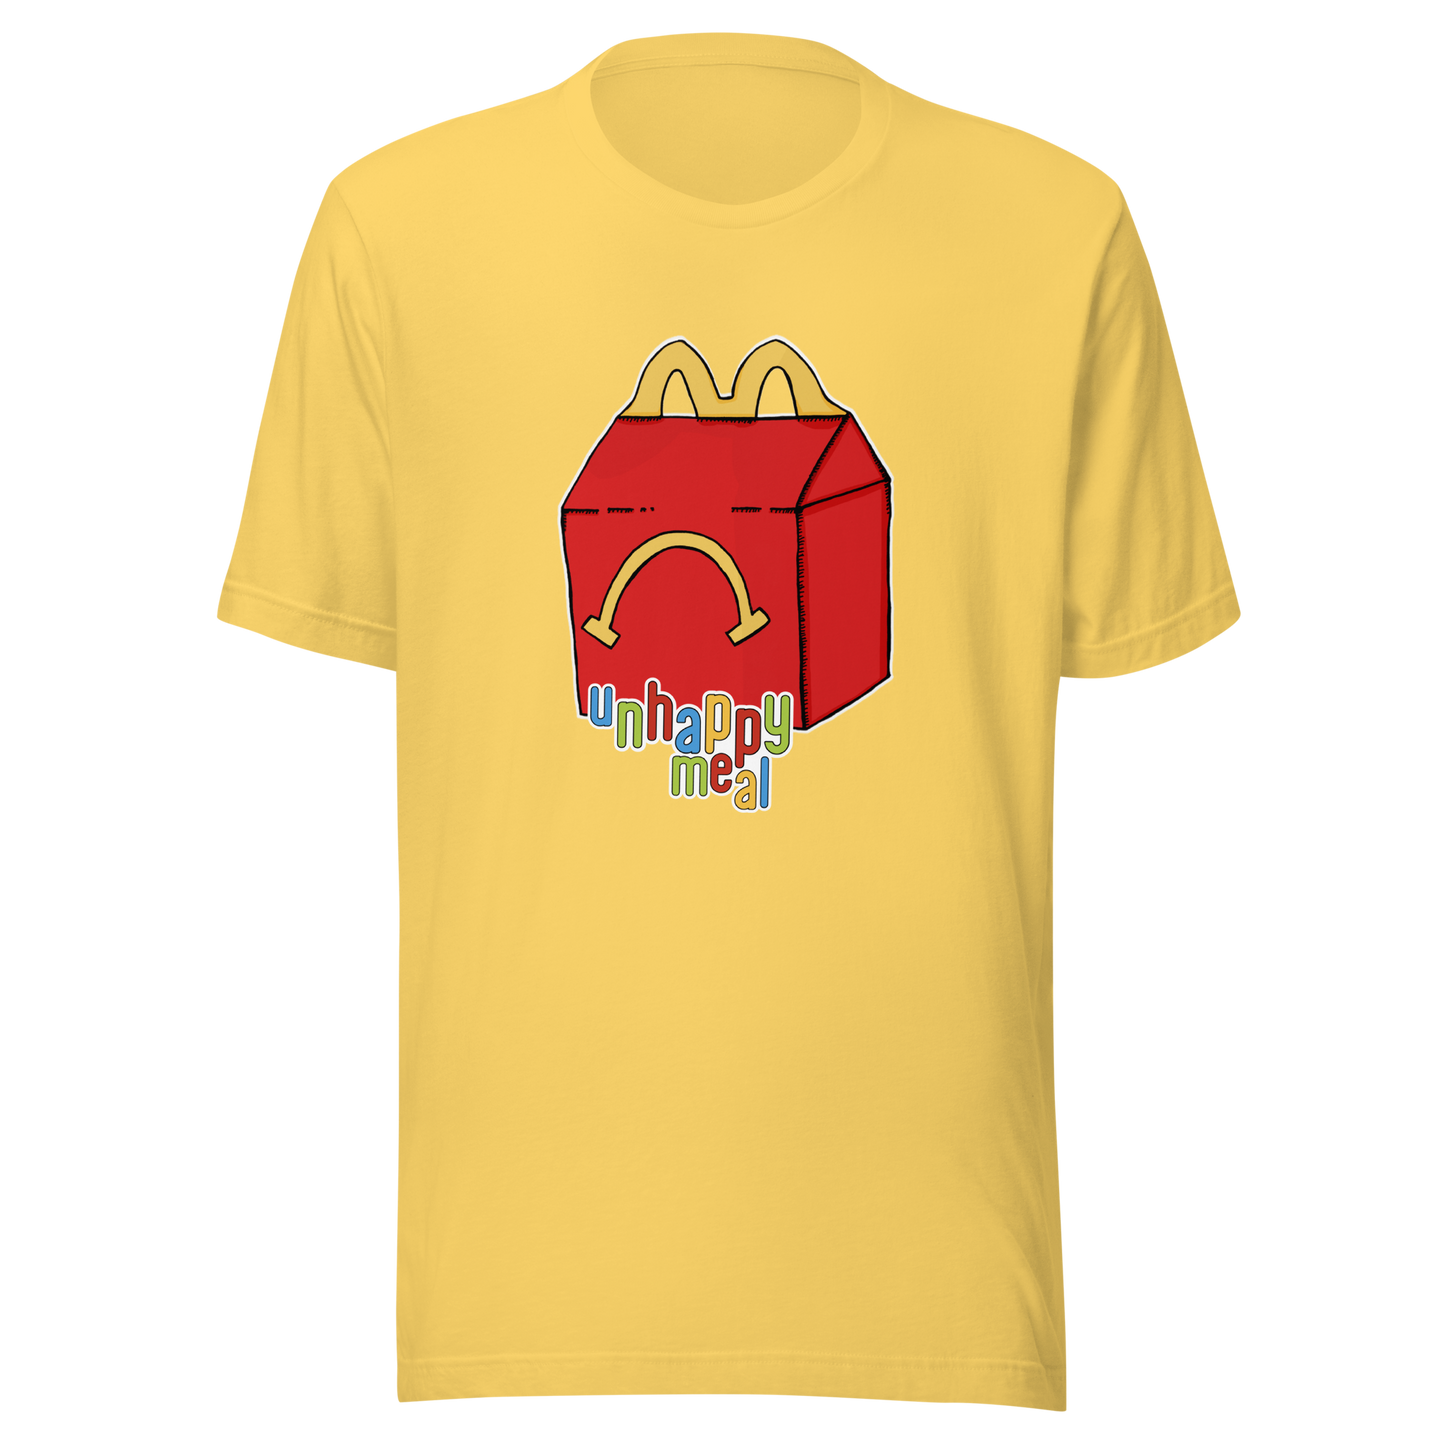 unhappy meal t-shirt in yellow - gaslit apparel